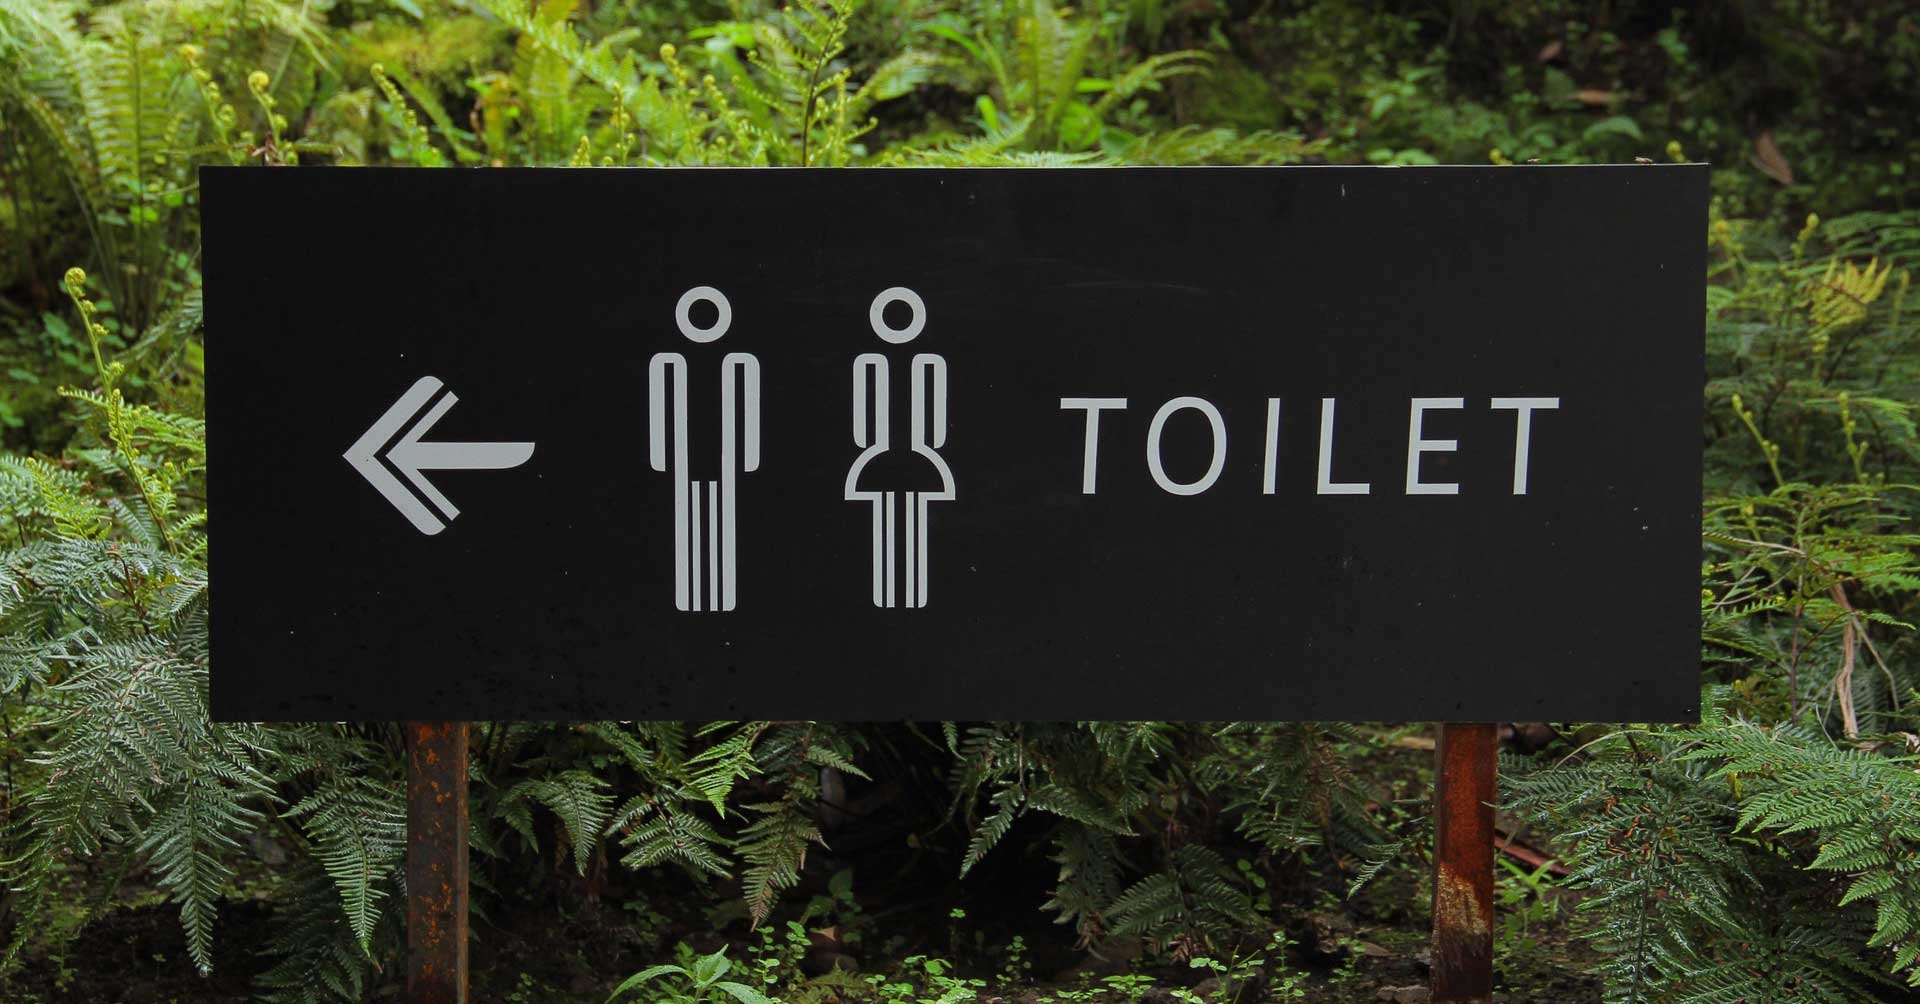 Fear of Urinating in Public